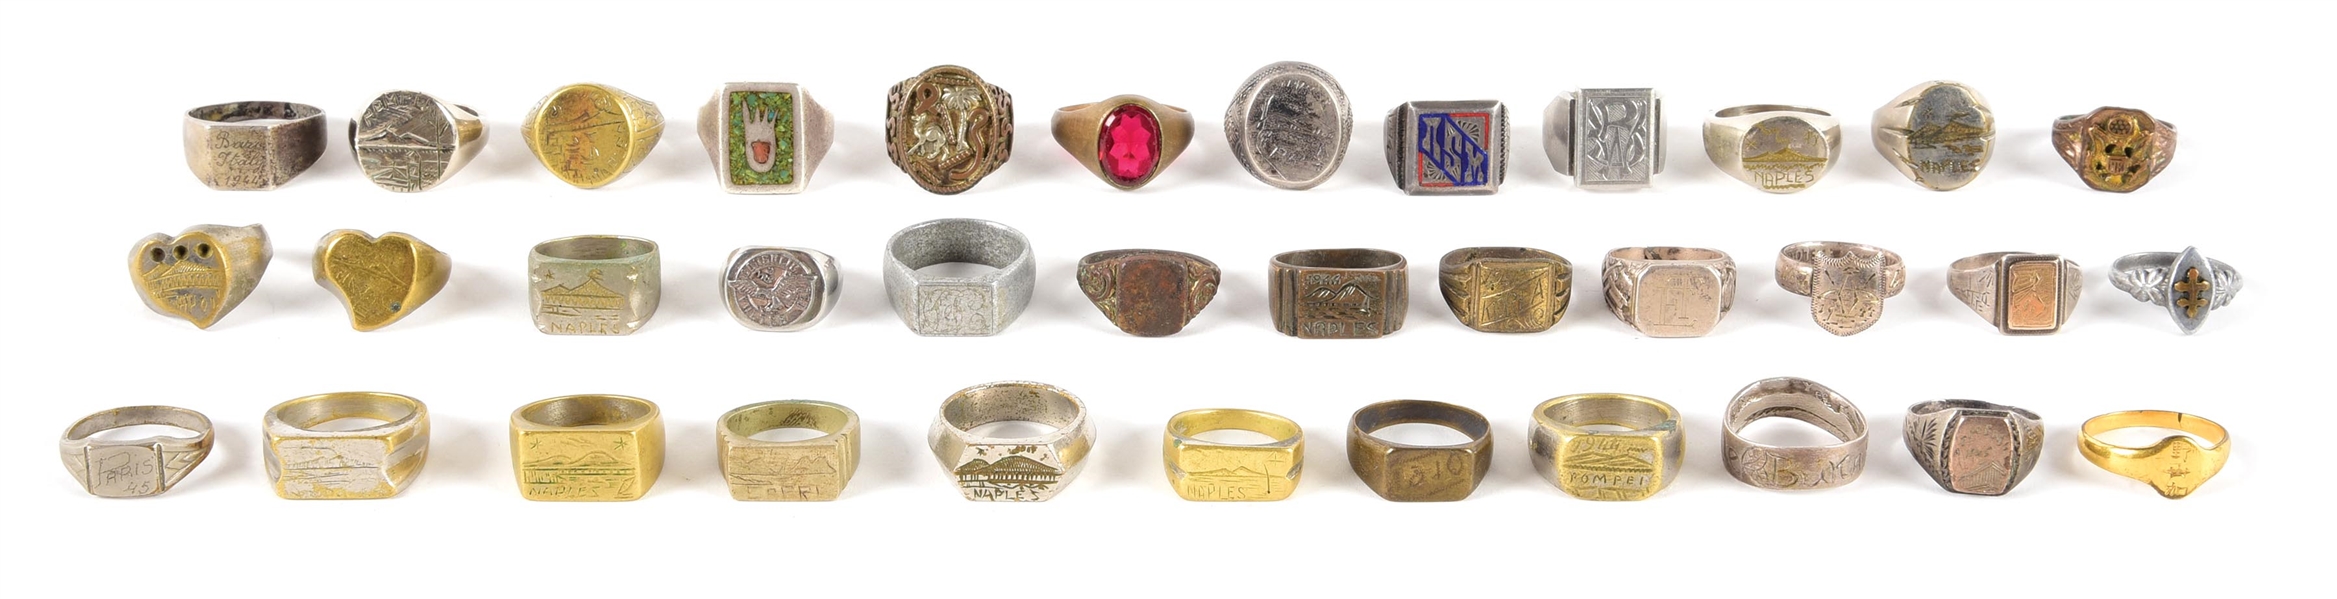 LOT OF US WWII THEATER MADE SOUVENIR RINGS 